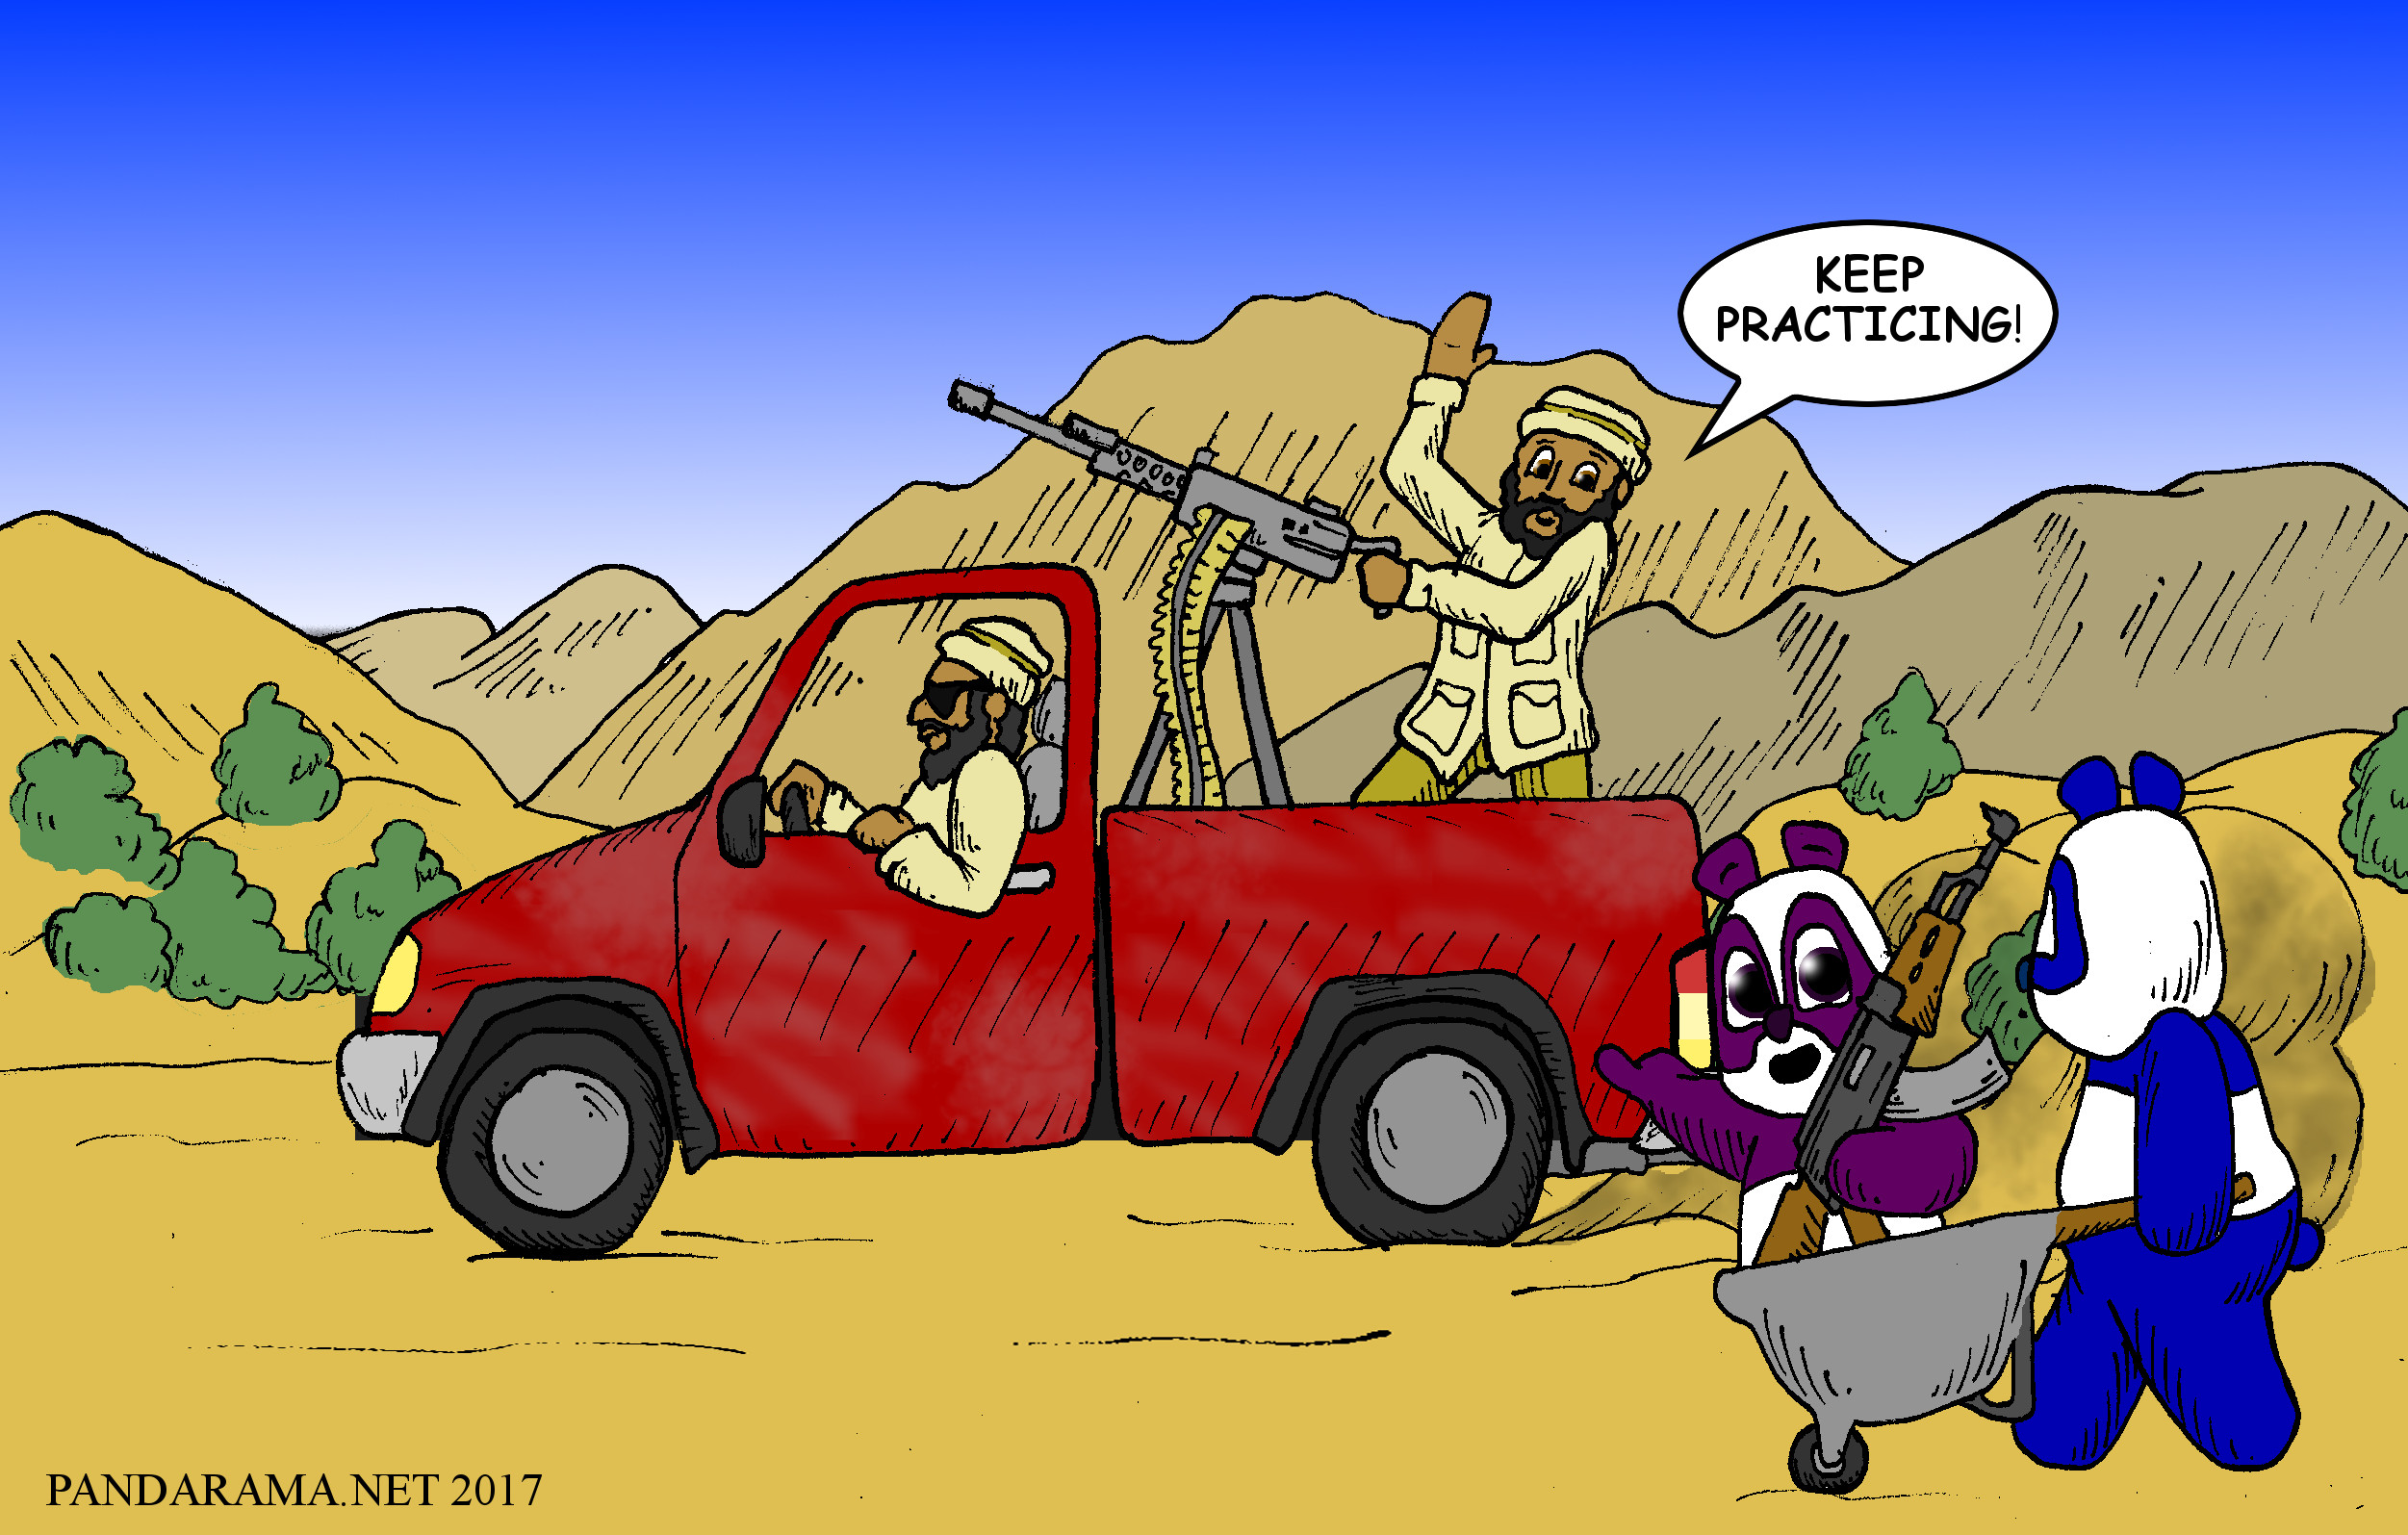 panda pushing a wheelbarrow with another panda in it who is holding an AK-47. A truck with a machinegun mounted to the back drives by, and the gunner encourages the pandas to keep practicing. technical vehicle. m2 machinegun cartoon.